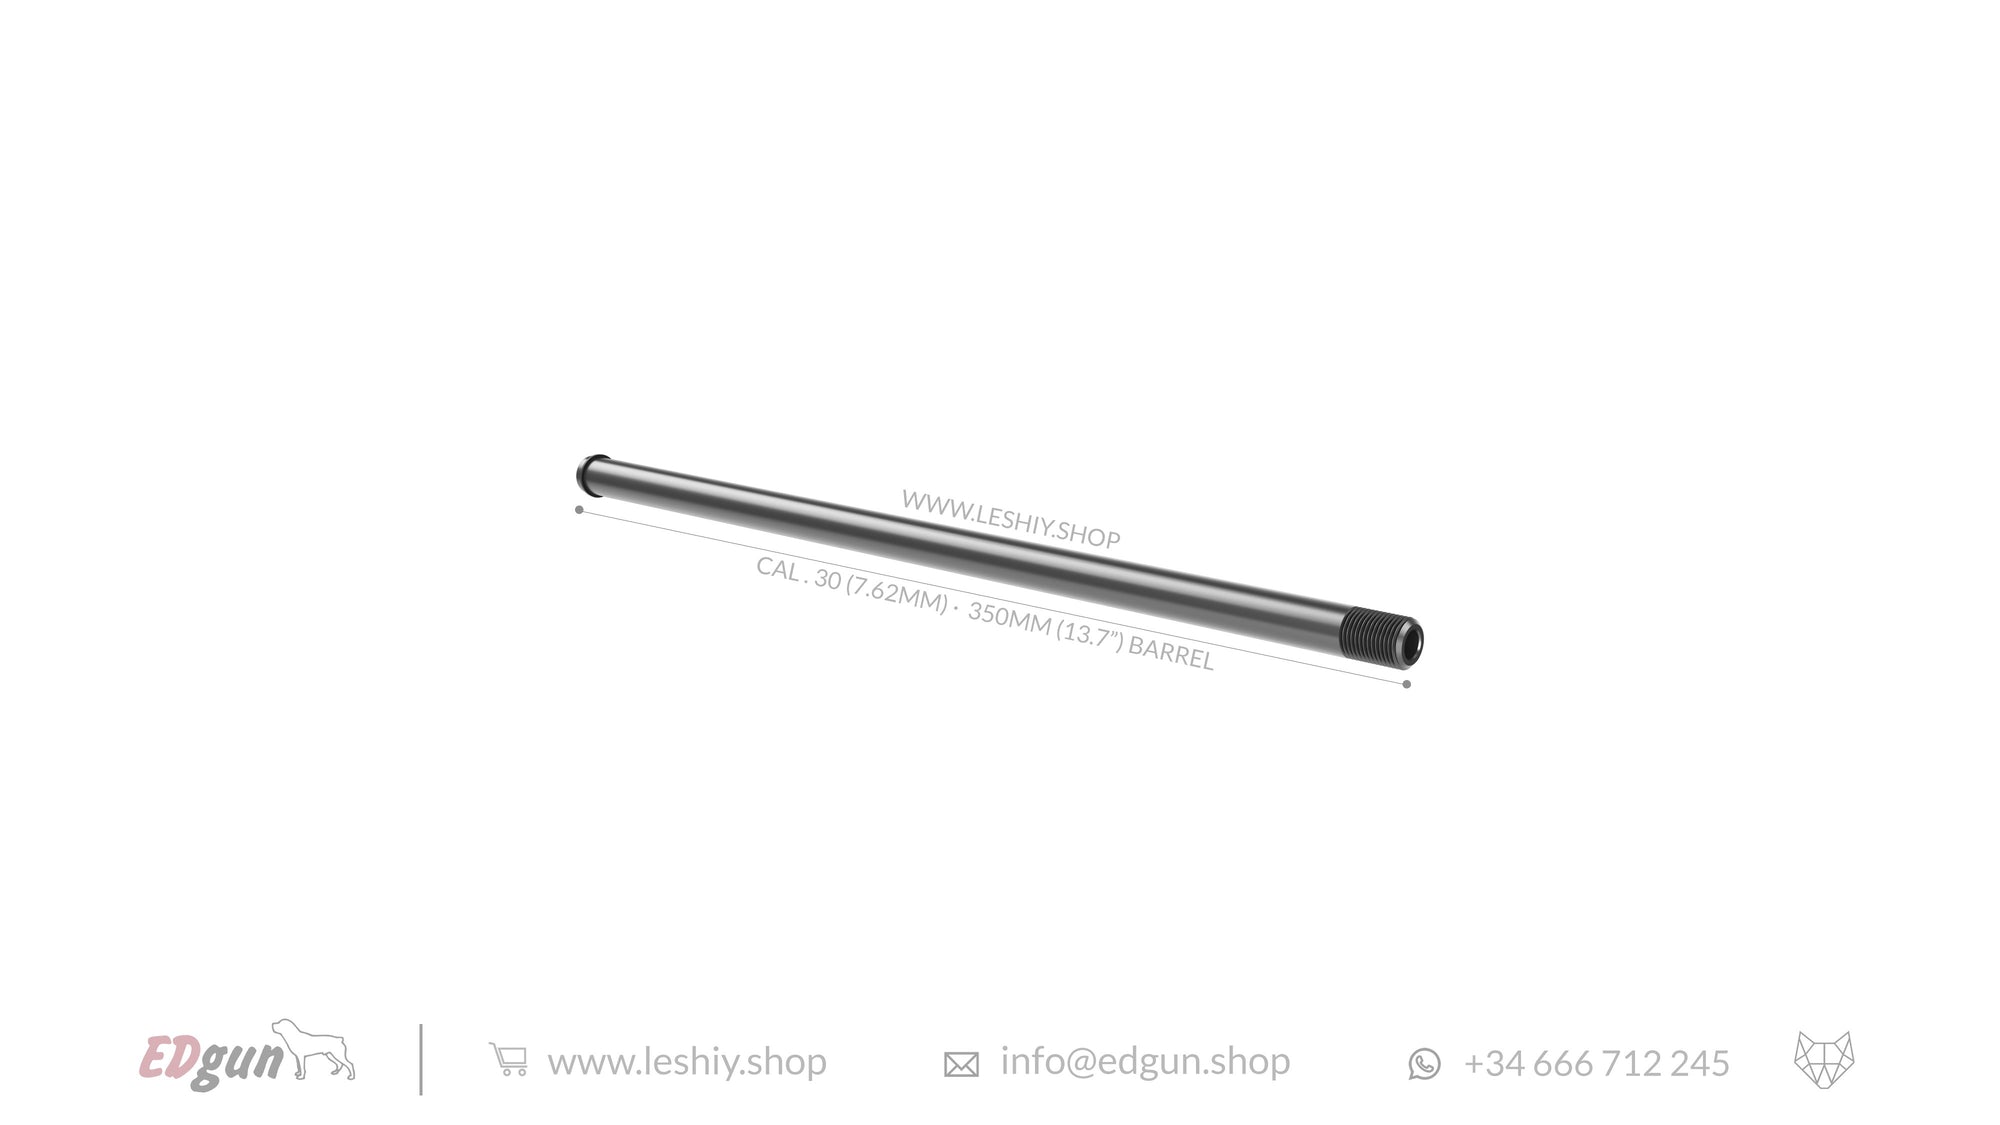 Barrels Lothar Walther cal. 30 (7.62mm) - 350mm (13.7¨) for Leshiy 2